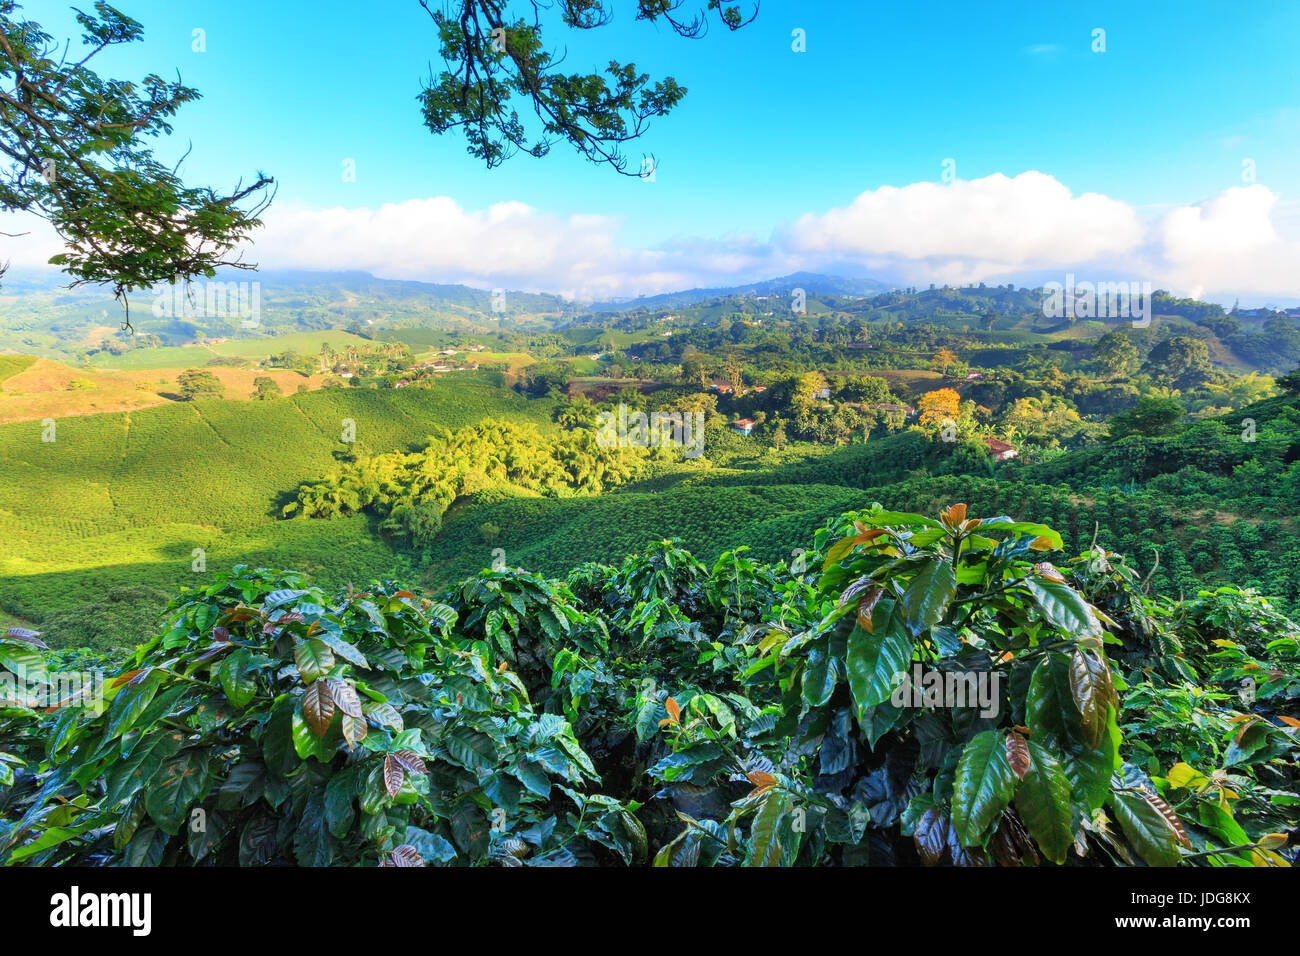 View of a Coffee plantation near Manizales in the Coffee Triangle of Colombia with coffee plants in the foreground. Stock Photo